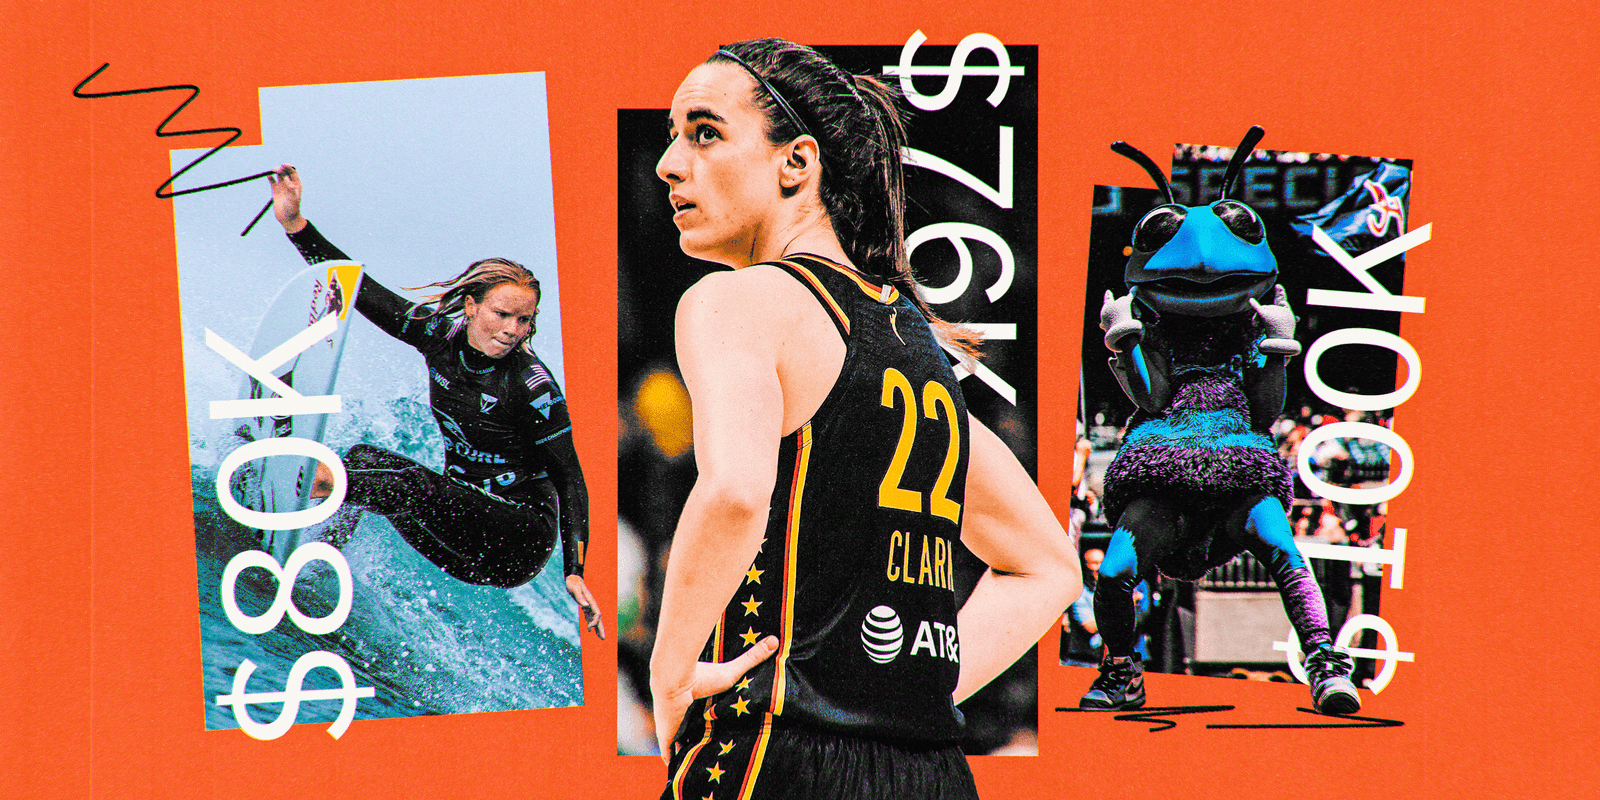 How does Caitlin Clark’s WNBA wage measure up in sports activities? An evaluation reveals large gaps